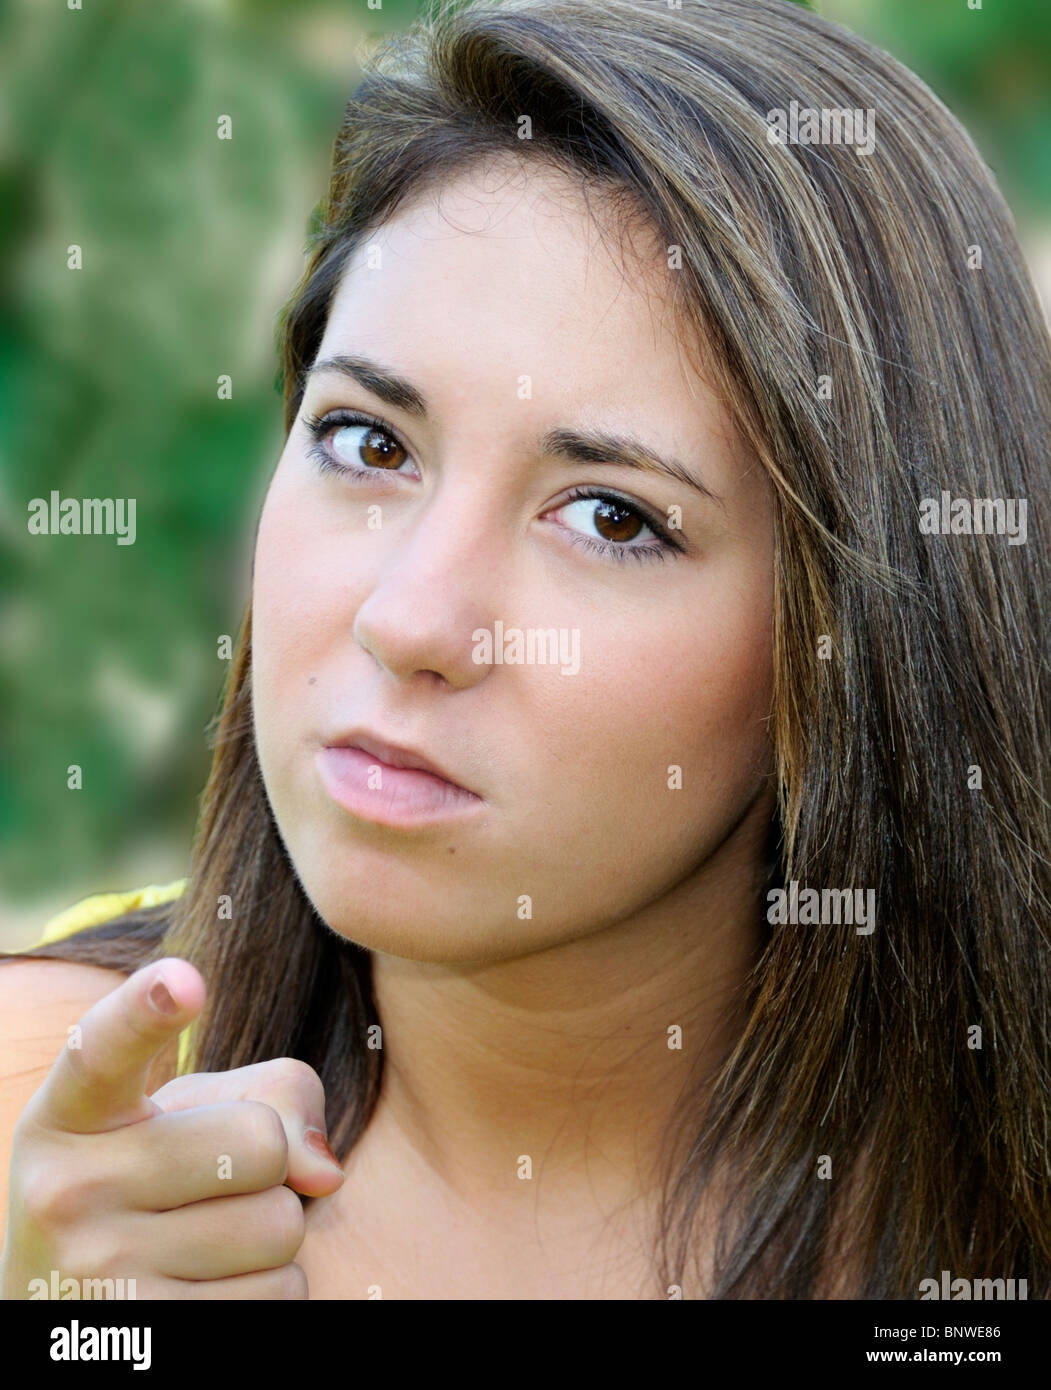 A Pretty Caucasian Teenage Girl Points Her Finger With An Angry Expression On Her Face Stock